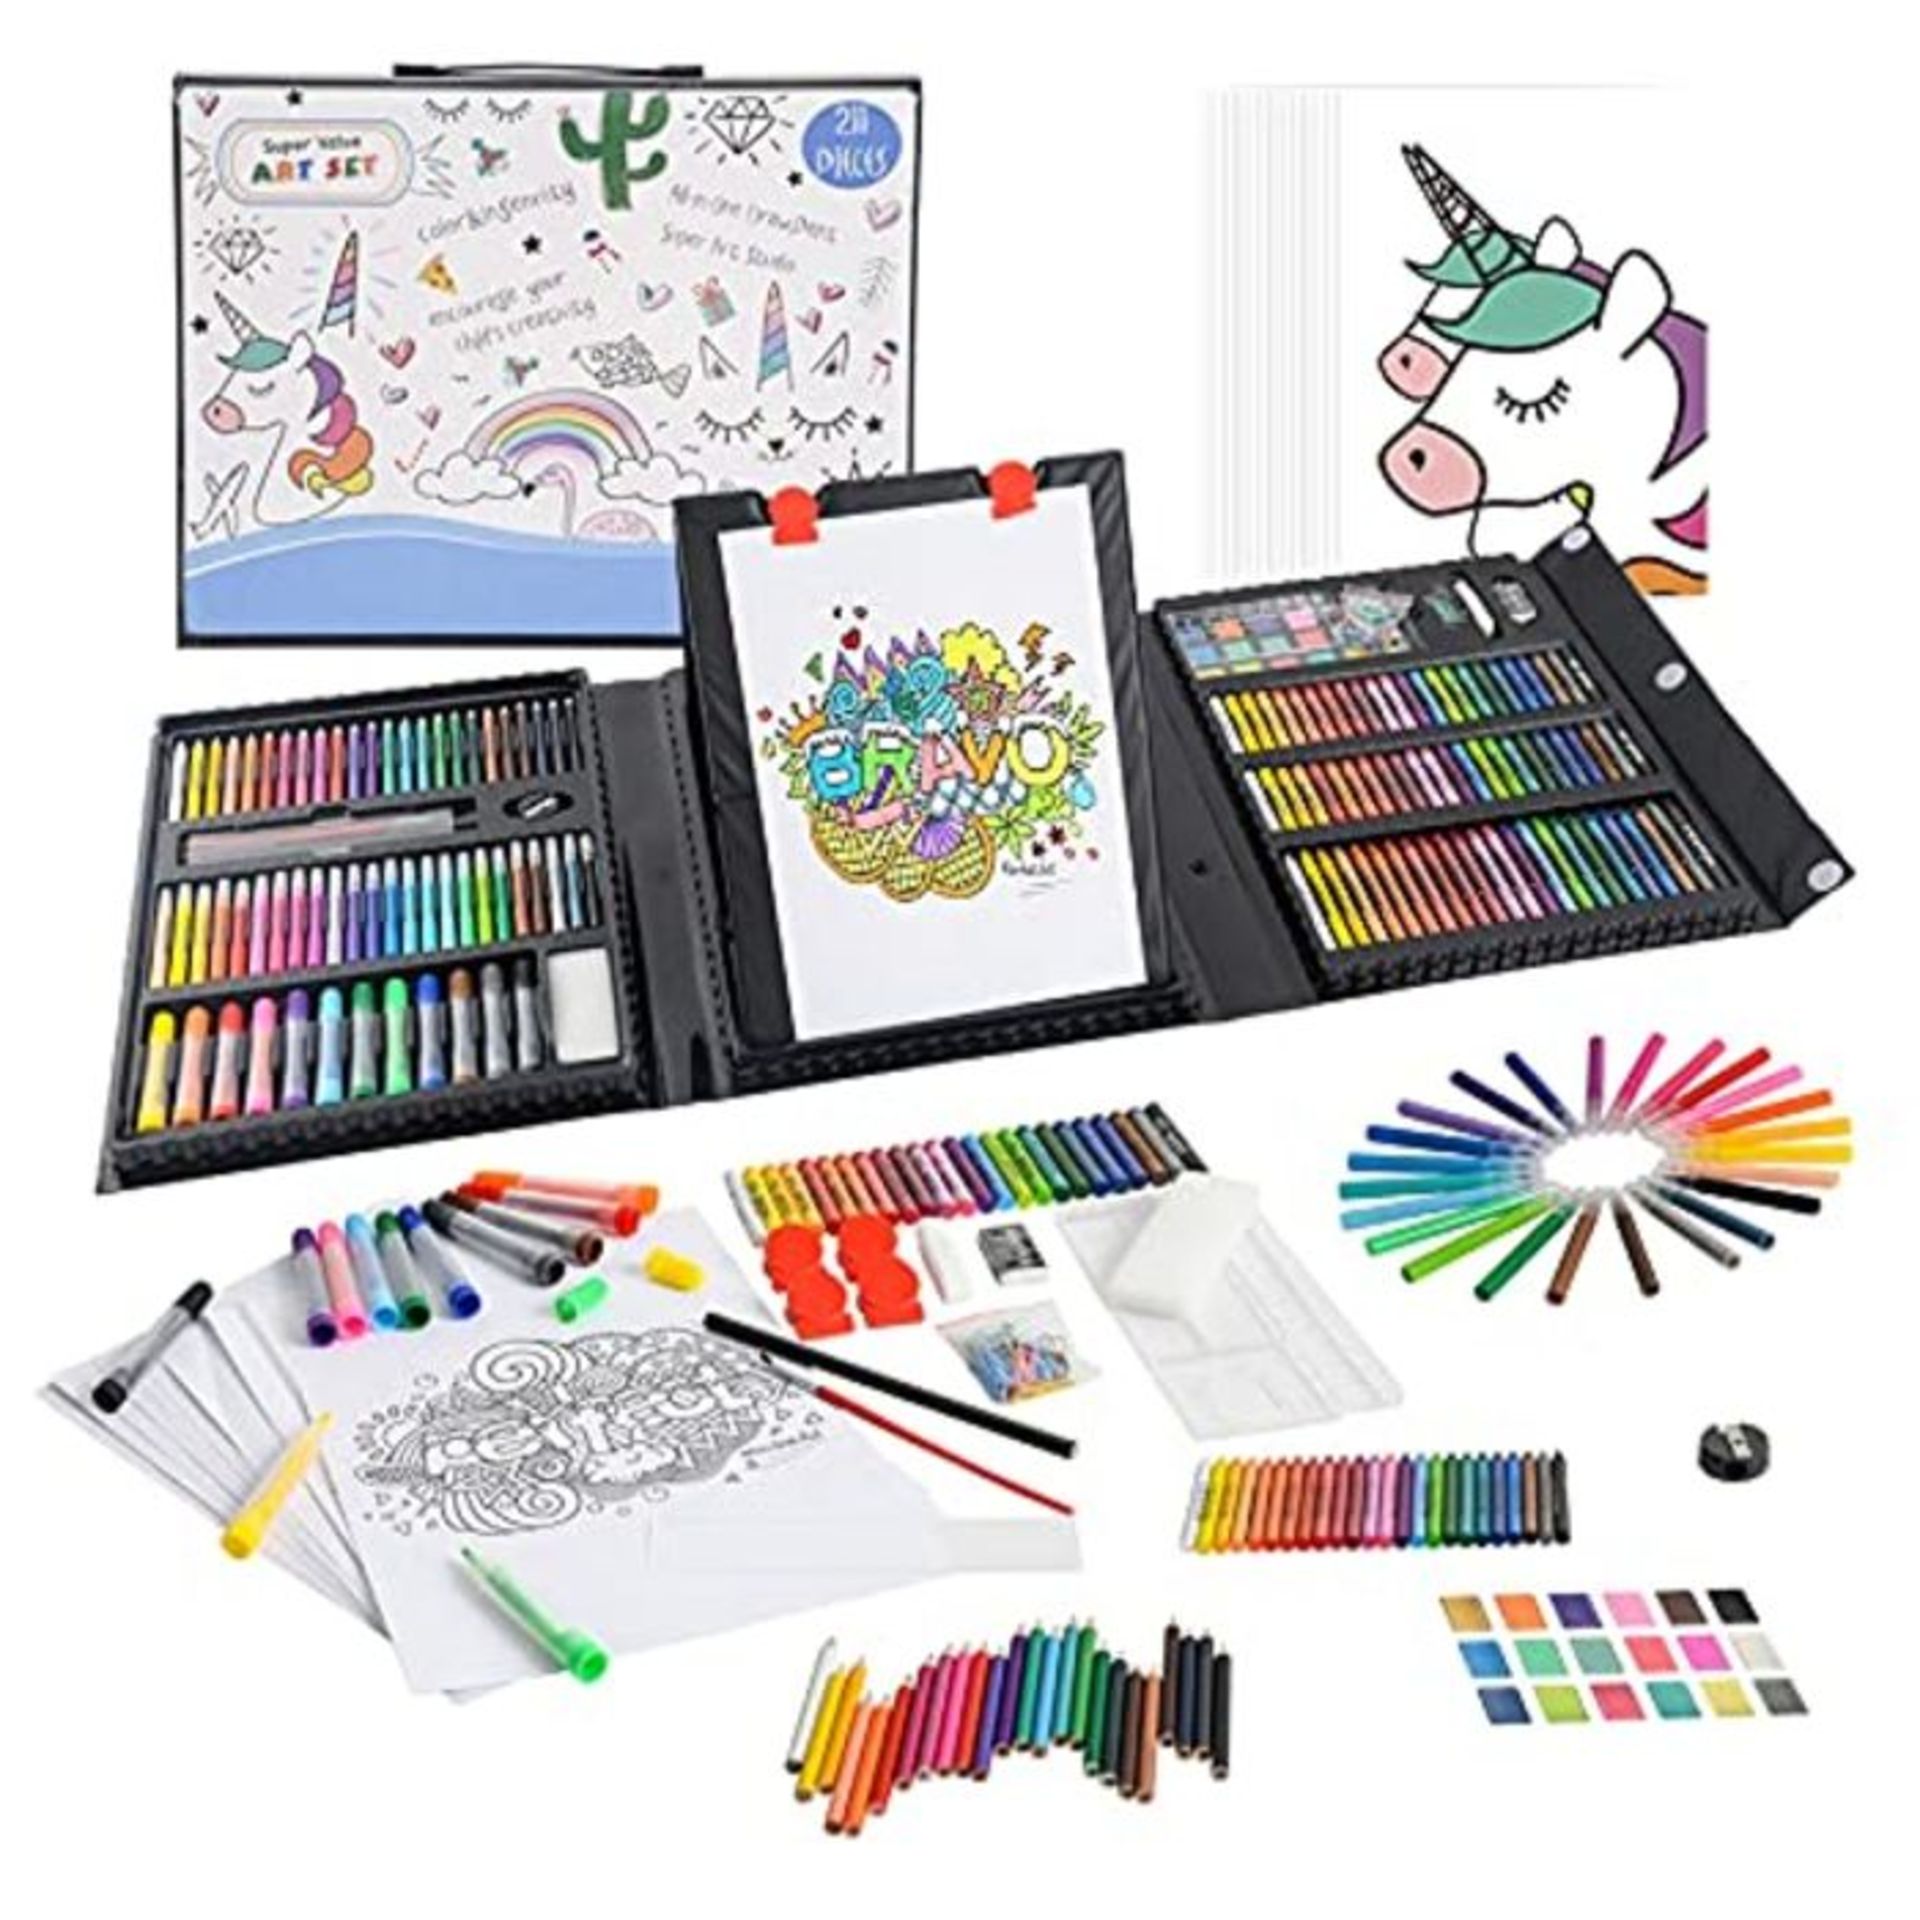 KIDDYCOLOR 211 Piece Deluxe Art Creativity Set Box for Beginners, Great Gift for Child